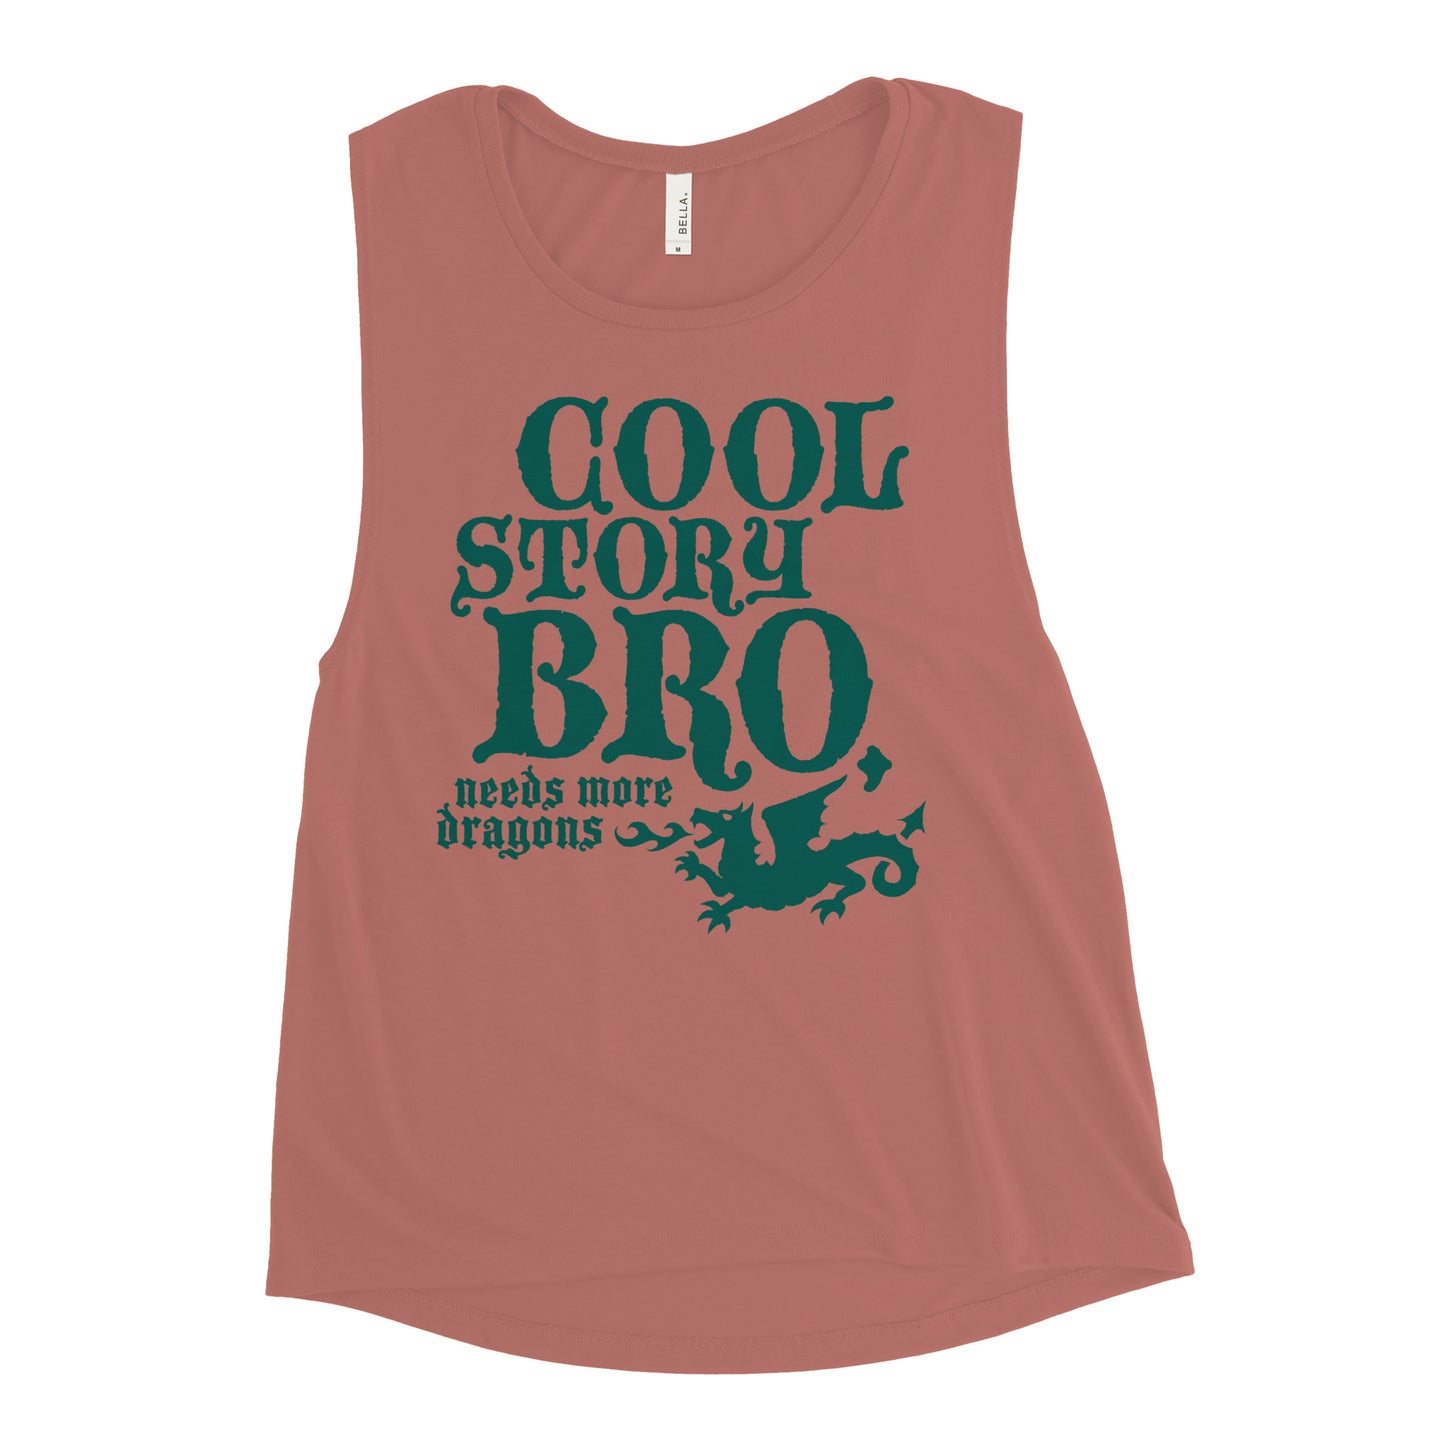 Cool Story Bro, Needs More Dragons Women's Muscle Tank